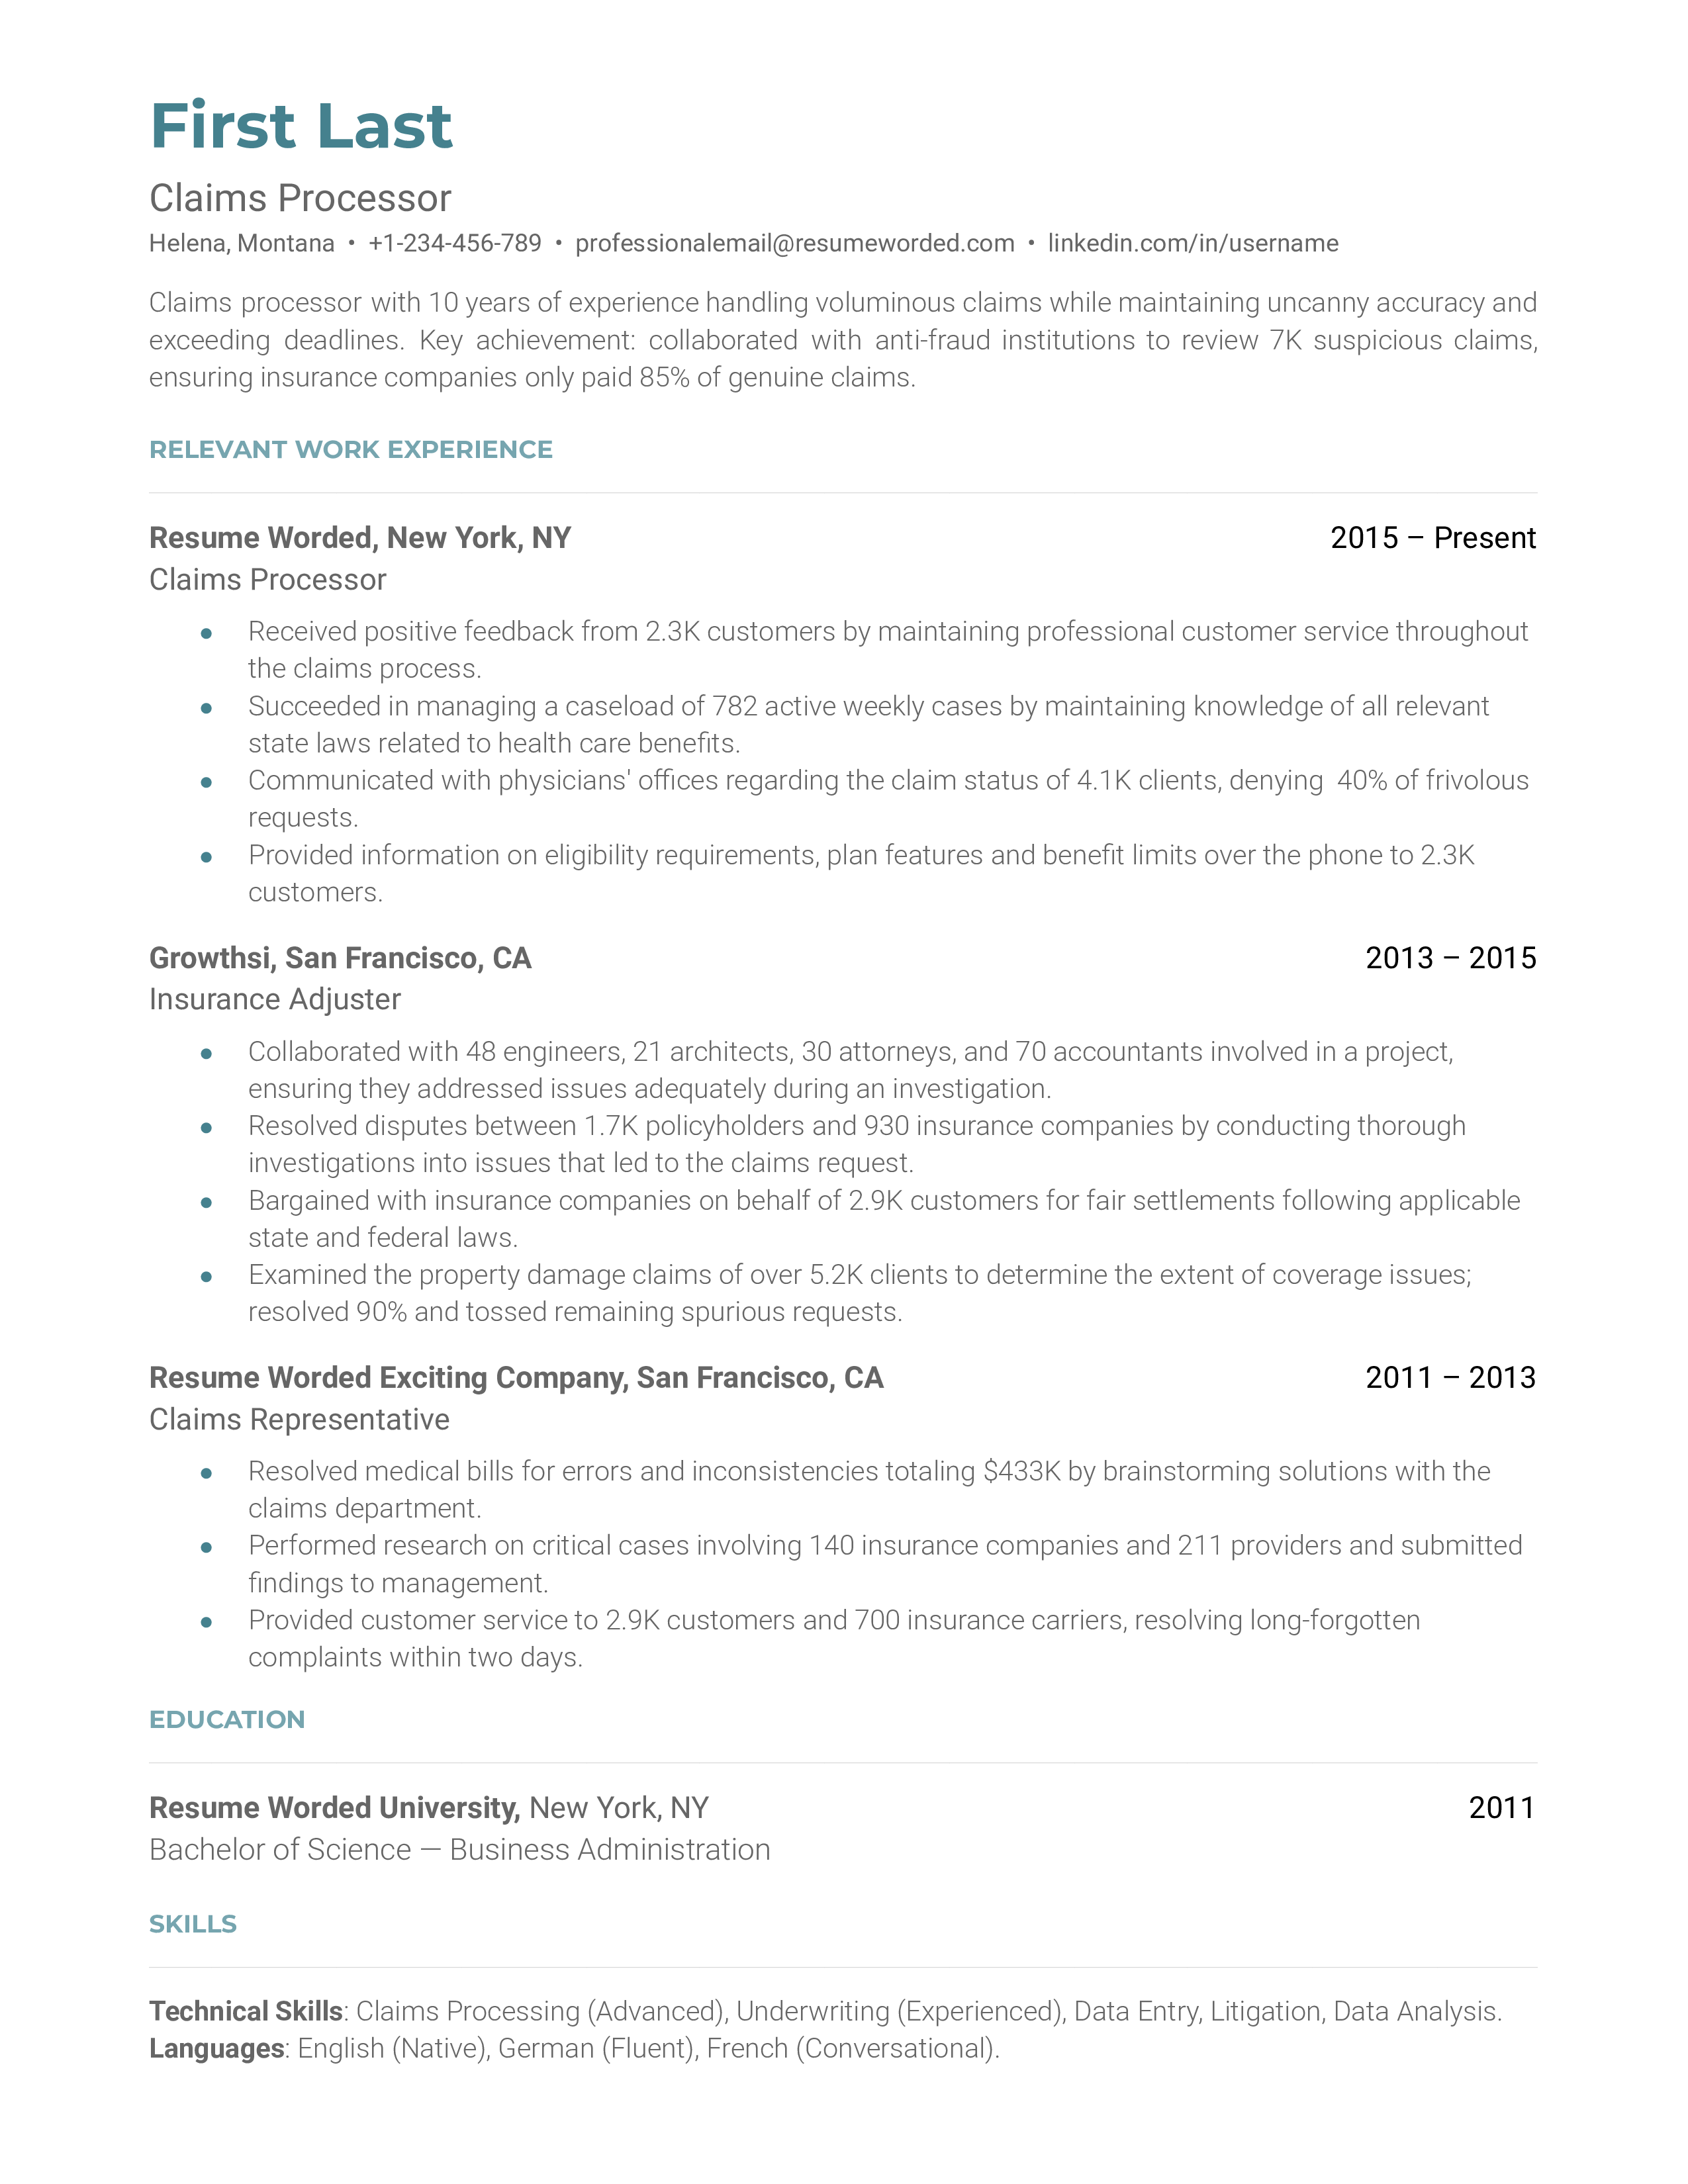 A CV for a Claims Processor showcasing investigation skills and technology expertise.